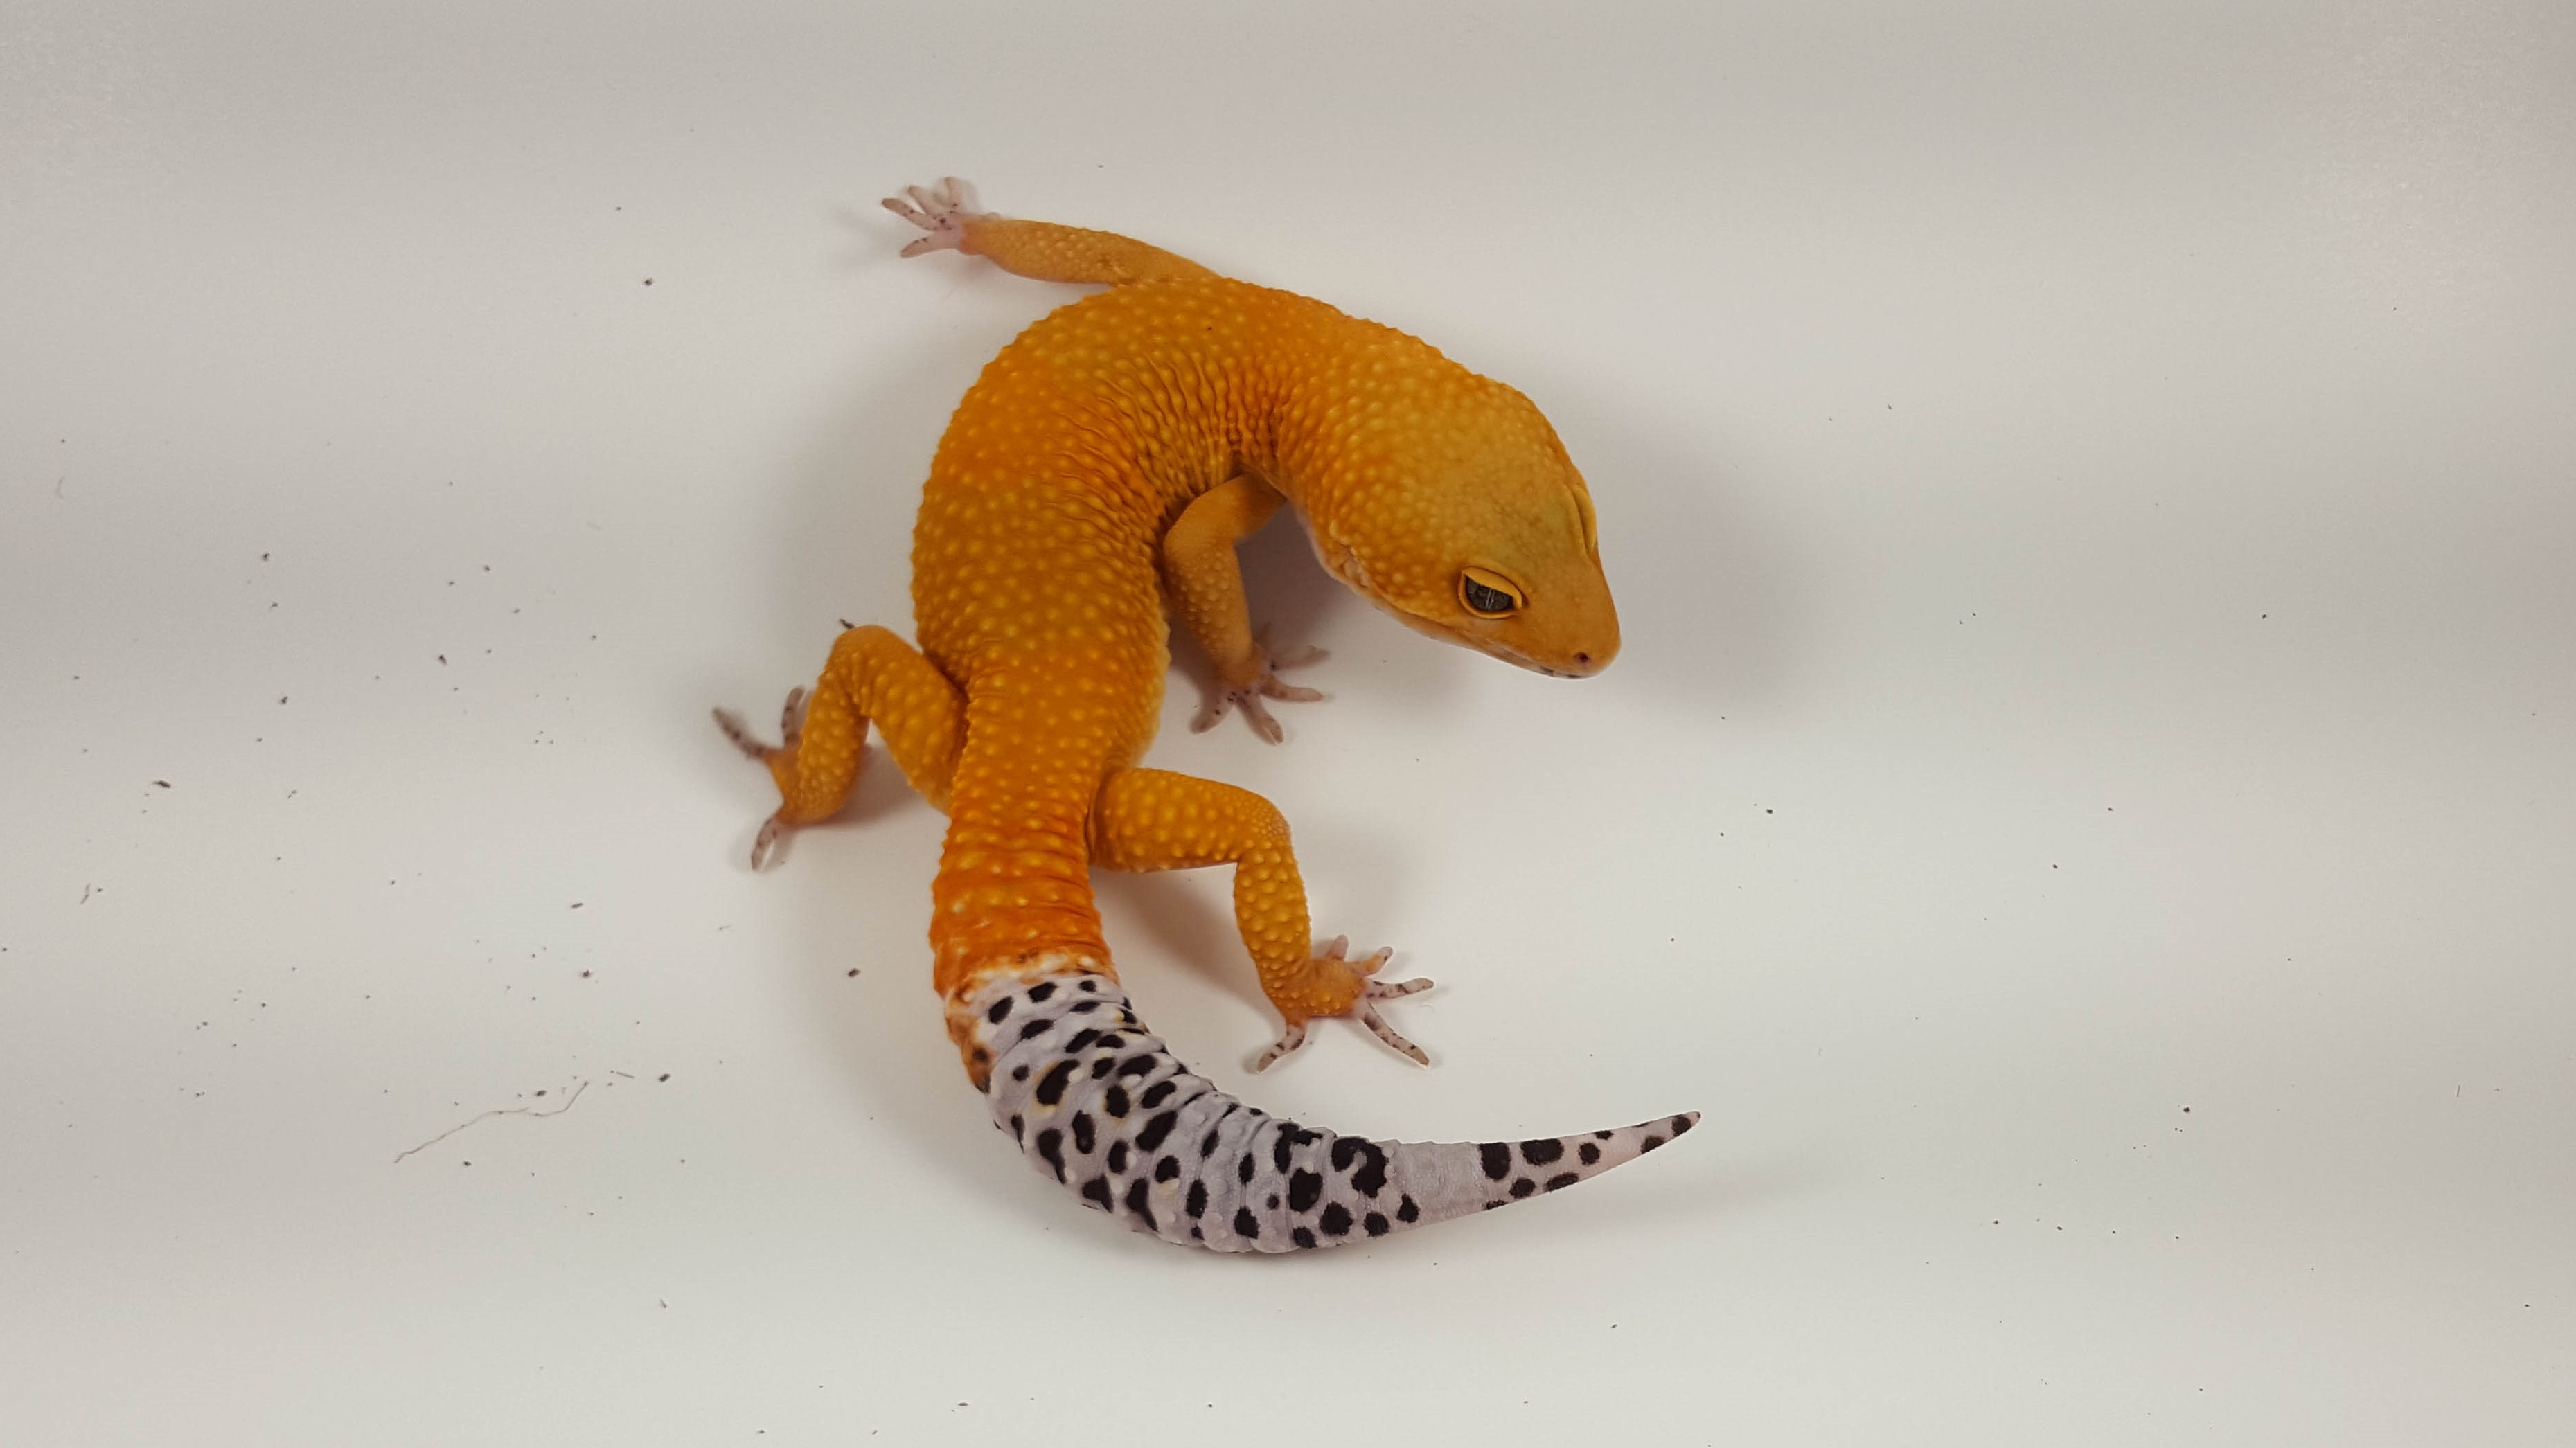 Tangerine Leopard Gecko by Handcrafted Herps